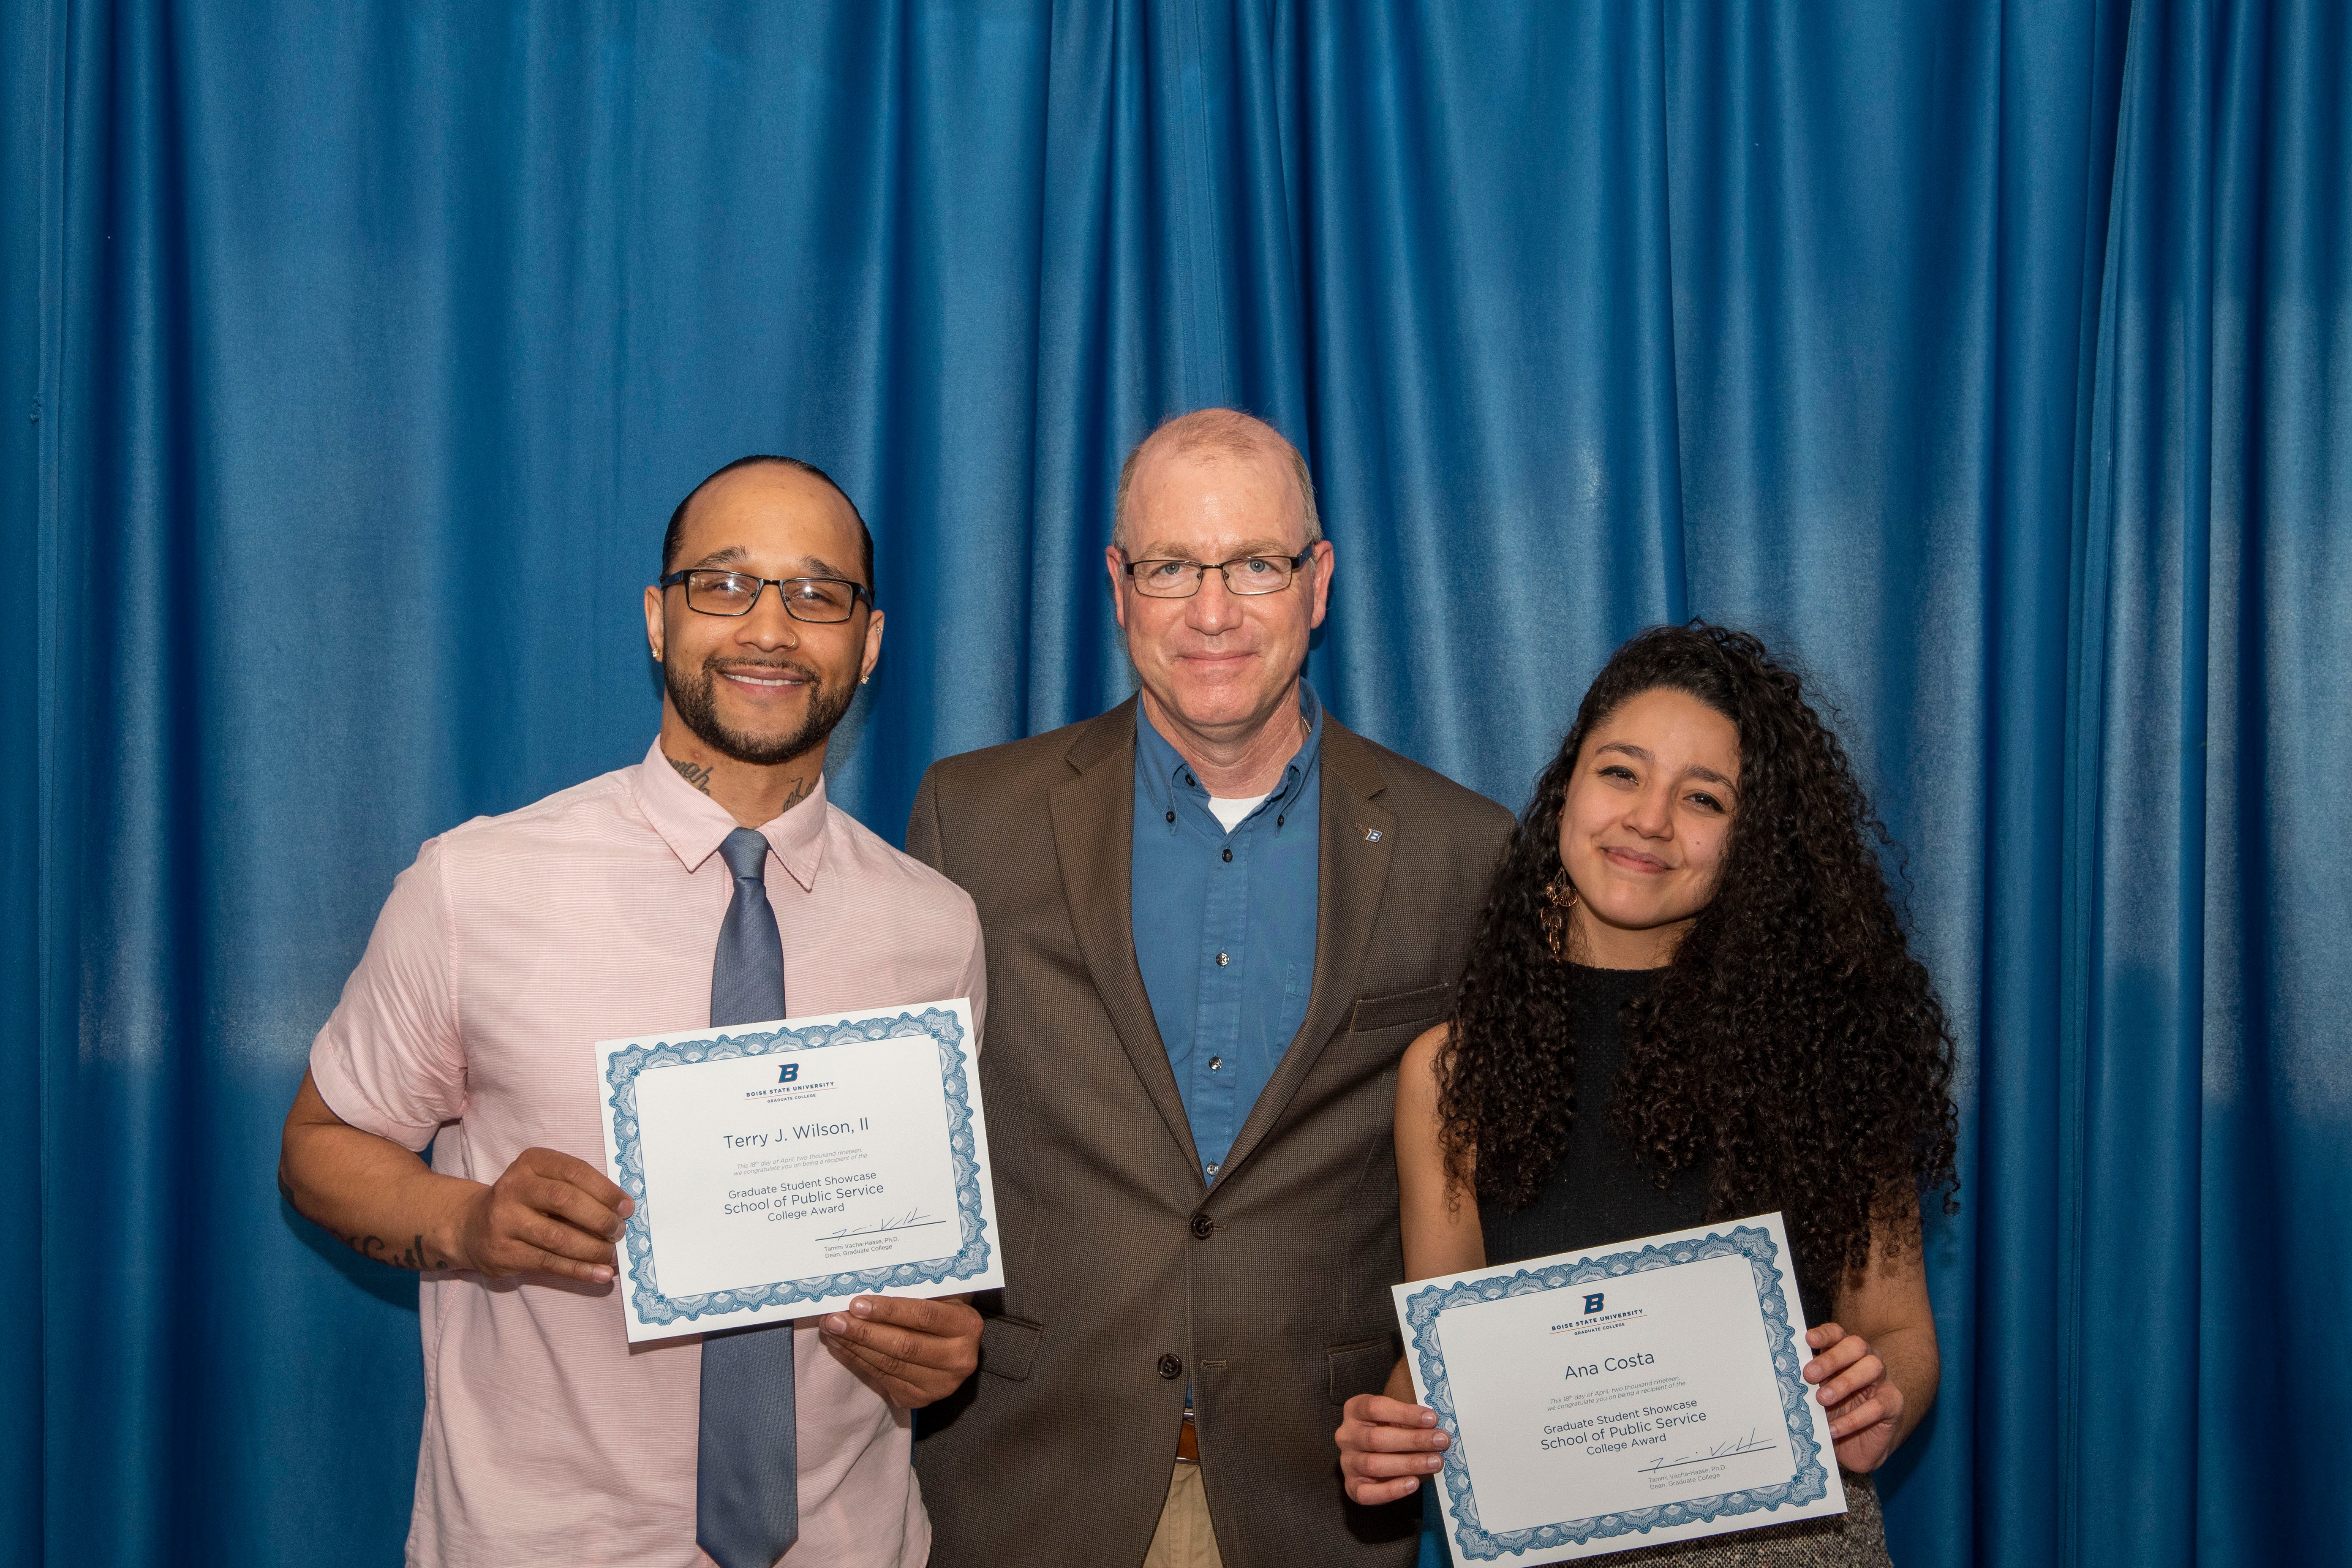 Two of 70 award winners, Terry Wilson II (left), and Ana Costa (right) pose with School of Public Service Associate Dean Andrew Giacomazzi (center)